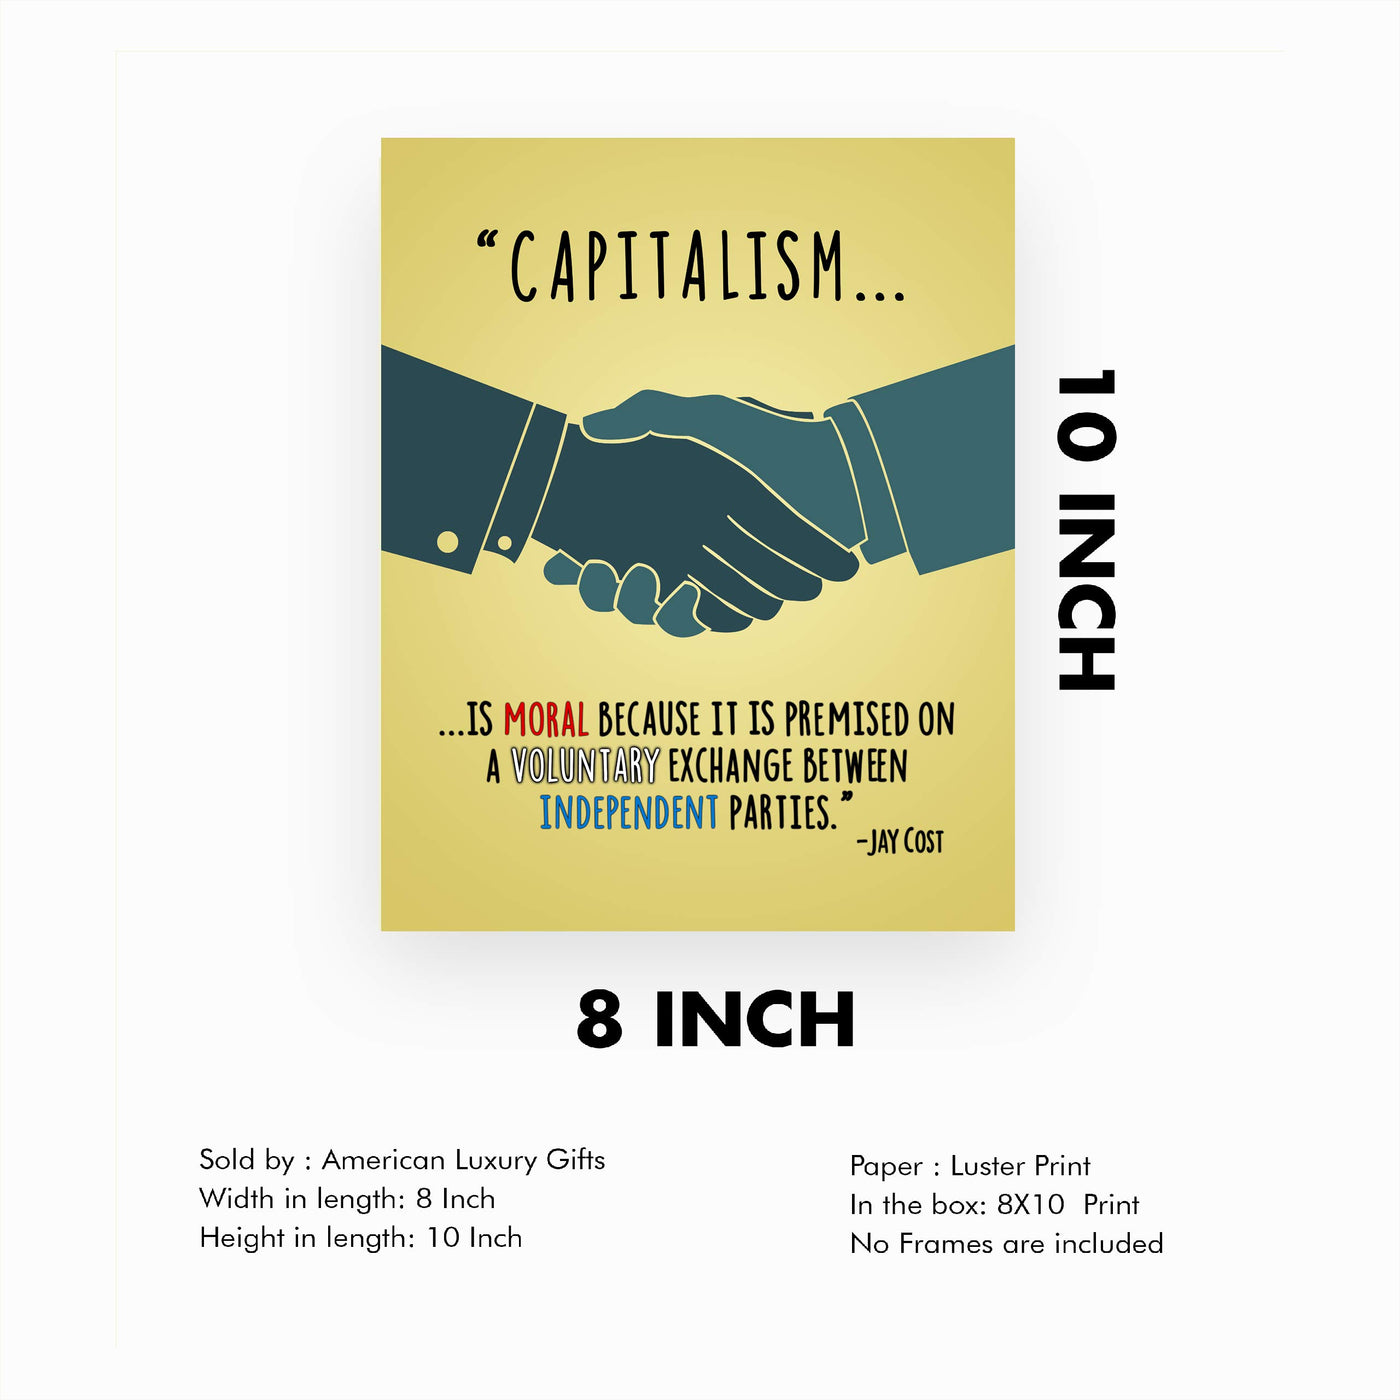 Capitalism-Voluntary Exchange Between Independent Parties-8 x 10" Political Quotes Wall Art Print -Ready to Frame. Motivational Home-Office-Library-Cave Decor. Perfect Sign for History Classroom!